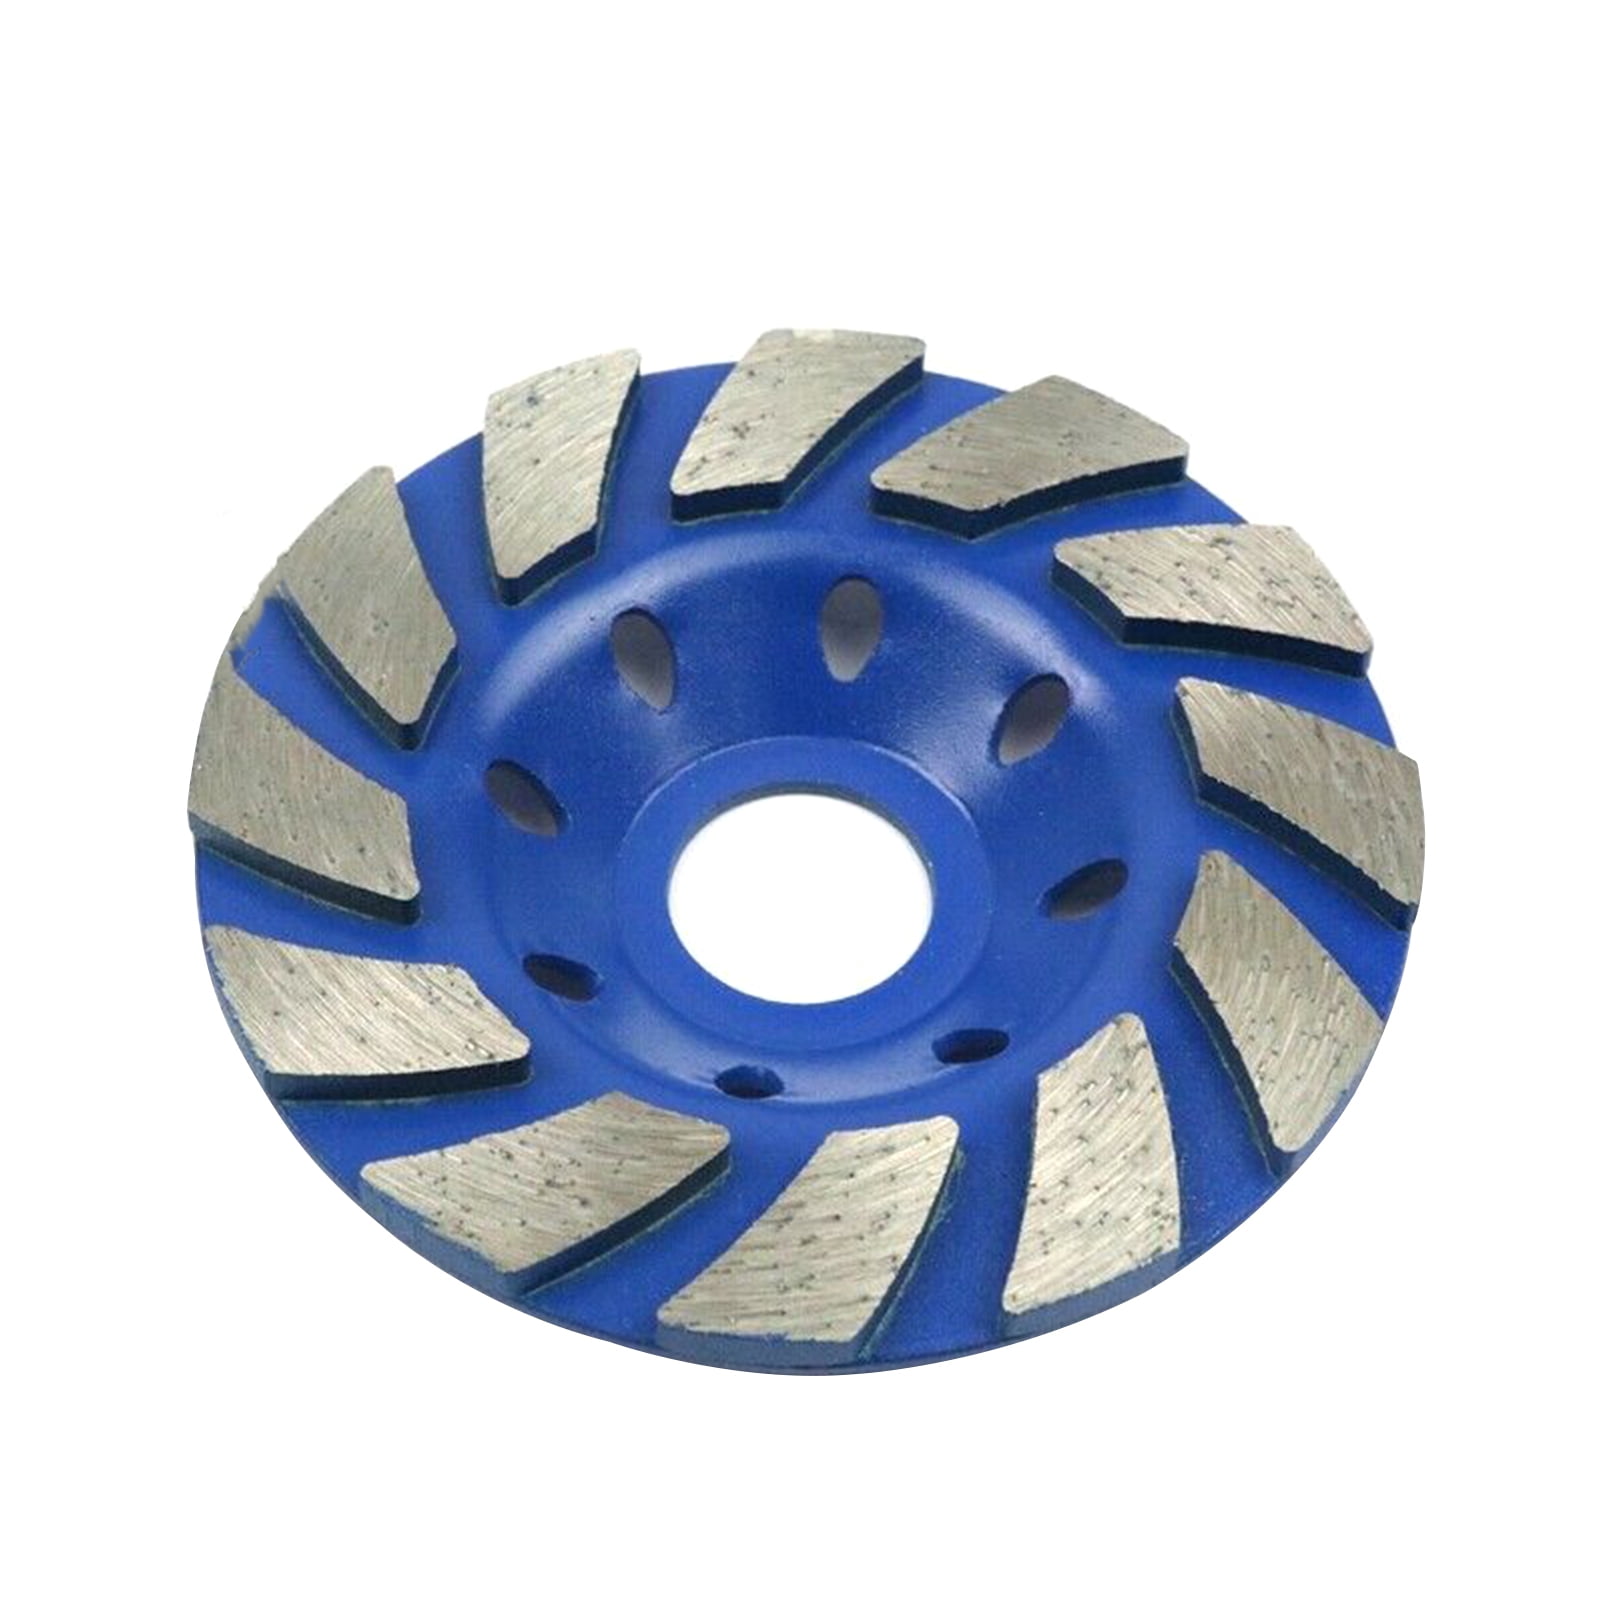 Walmeck 7 Diamond Segment Grinding Wheel Disc Bowl Shape Grinder Cup 22mm Inner Hole for Concrete Building Industry 